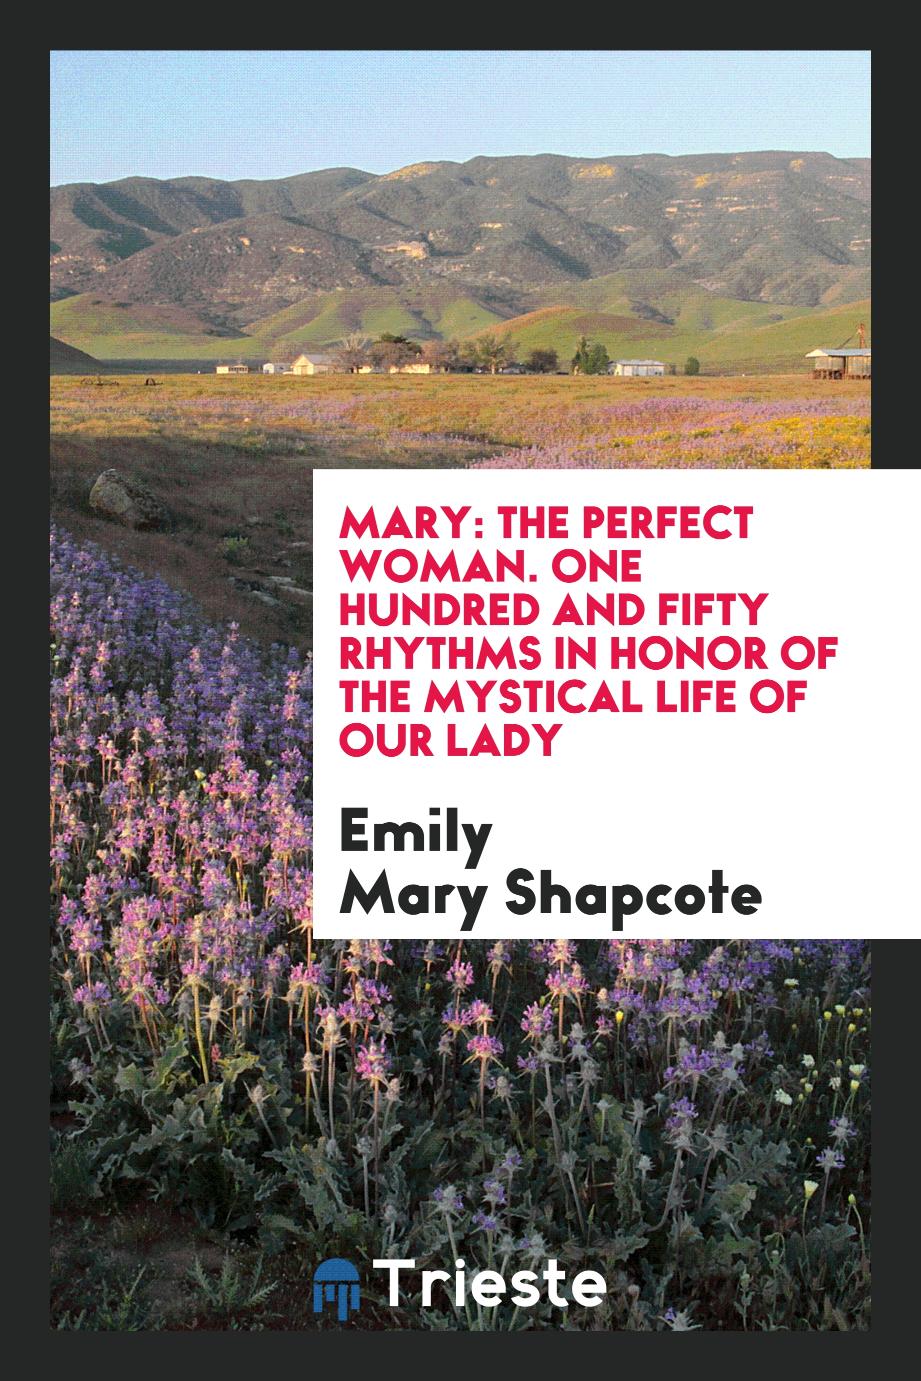 Mary: The Perfect Woman. One Hundred and Fifty Rhythms in Honor of the Mystical Life of Our Lady